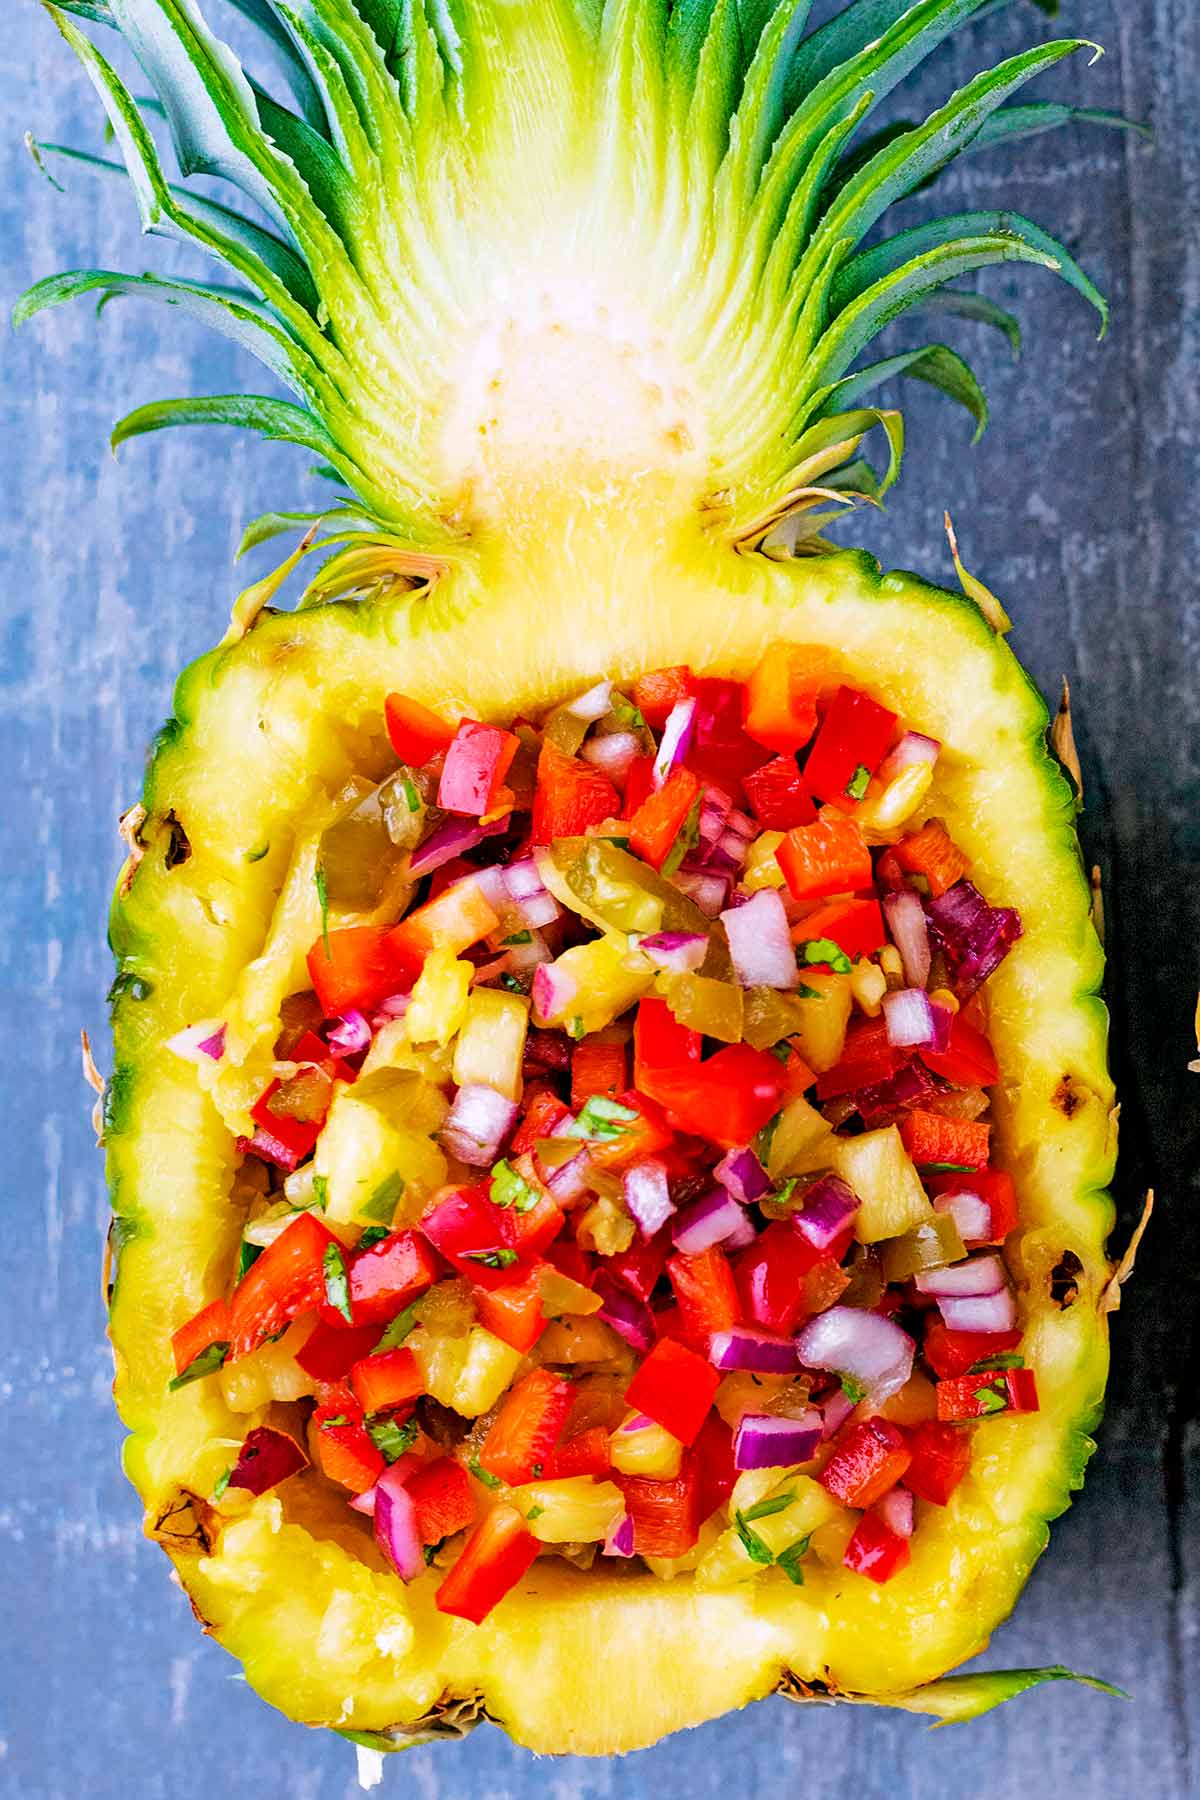 A pineapple half filled with salsa.